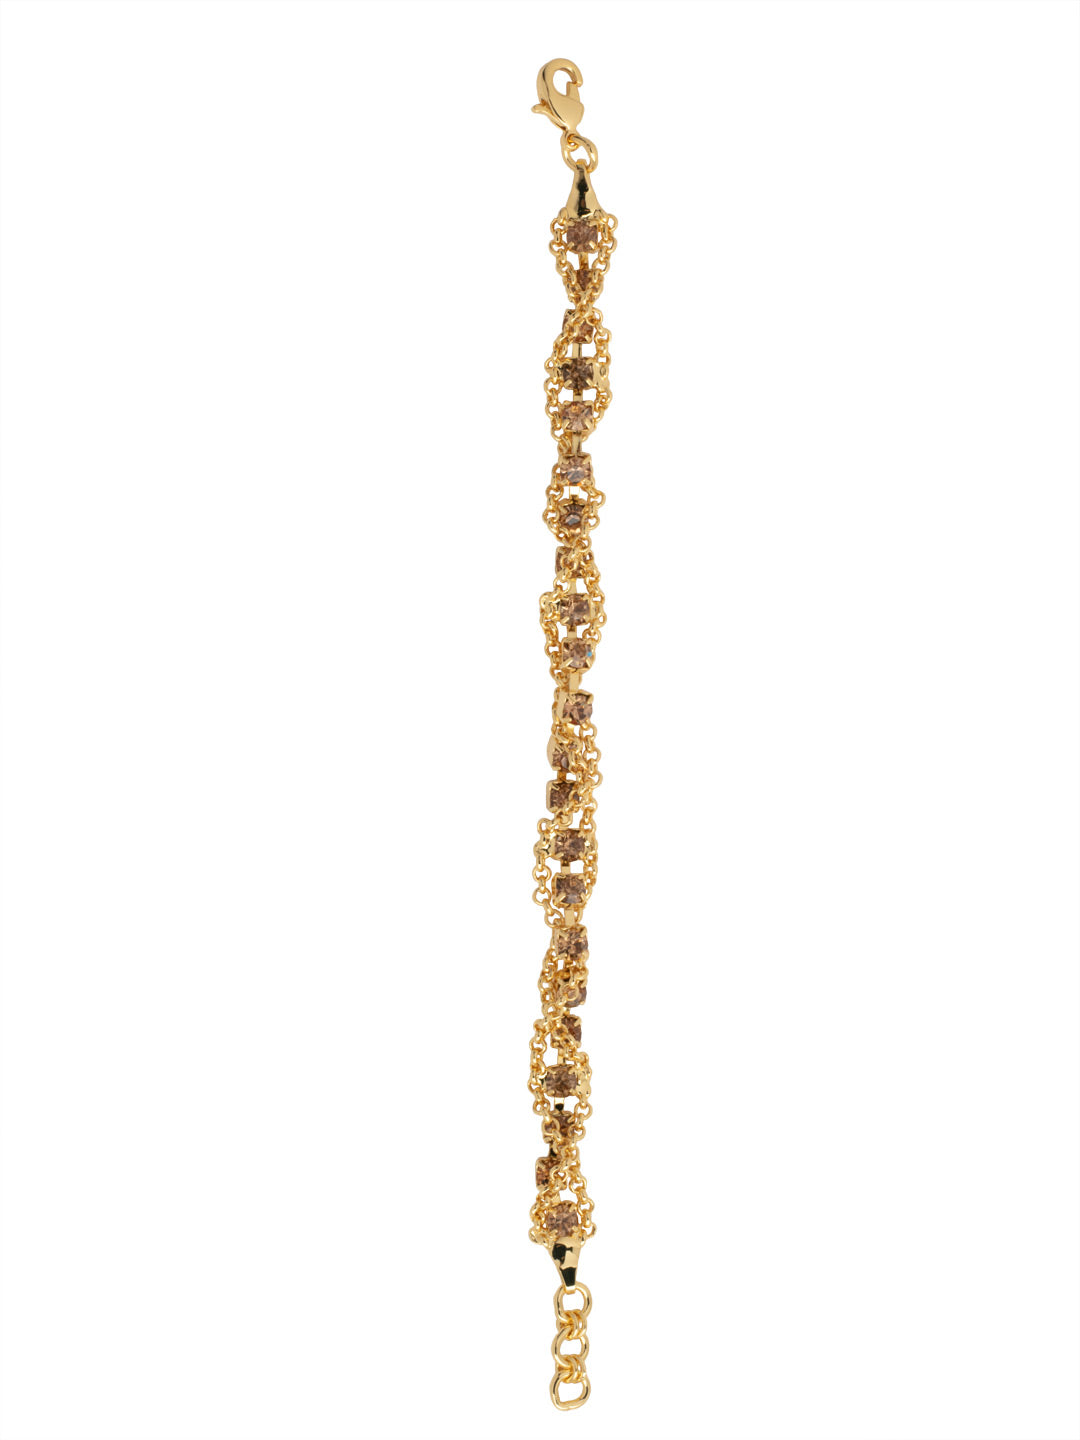 Brandi Classic Tennis Bracelet - BFC60BGRSU - <p>The Brandi Classic Tennis Bracelet features a classic crystal studded line bracelet, elevated with a braided chain design. From Sorrelli's Raw Sugar collection in our Bright Gold-tone finish.</p>